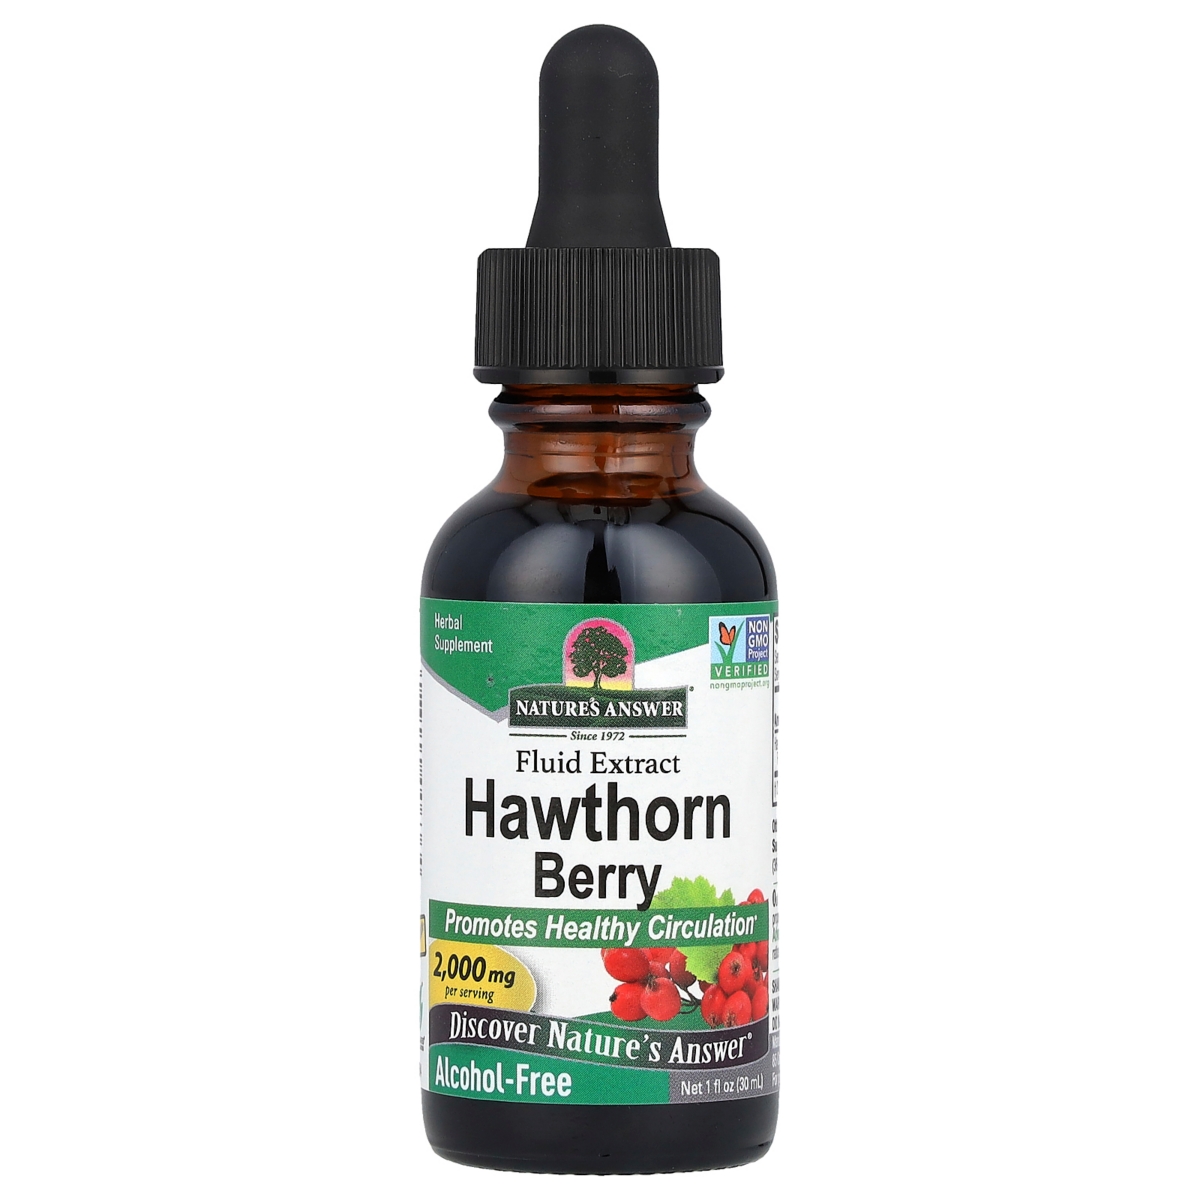 Hawthorn Berry Fluid Extract Alcohol-Free 2 000 mg - 1 fl oz (30 ml) - Assorted Pre-pack (See Table